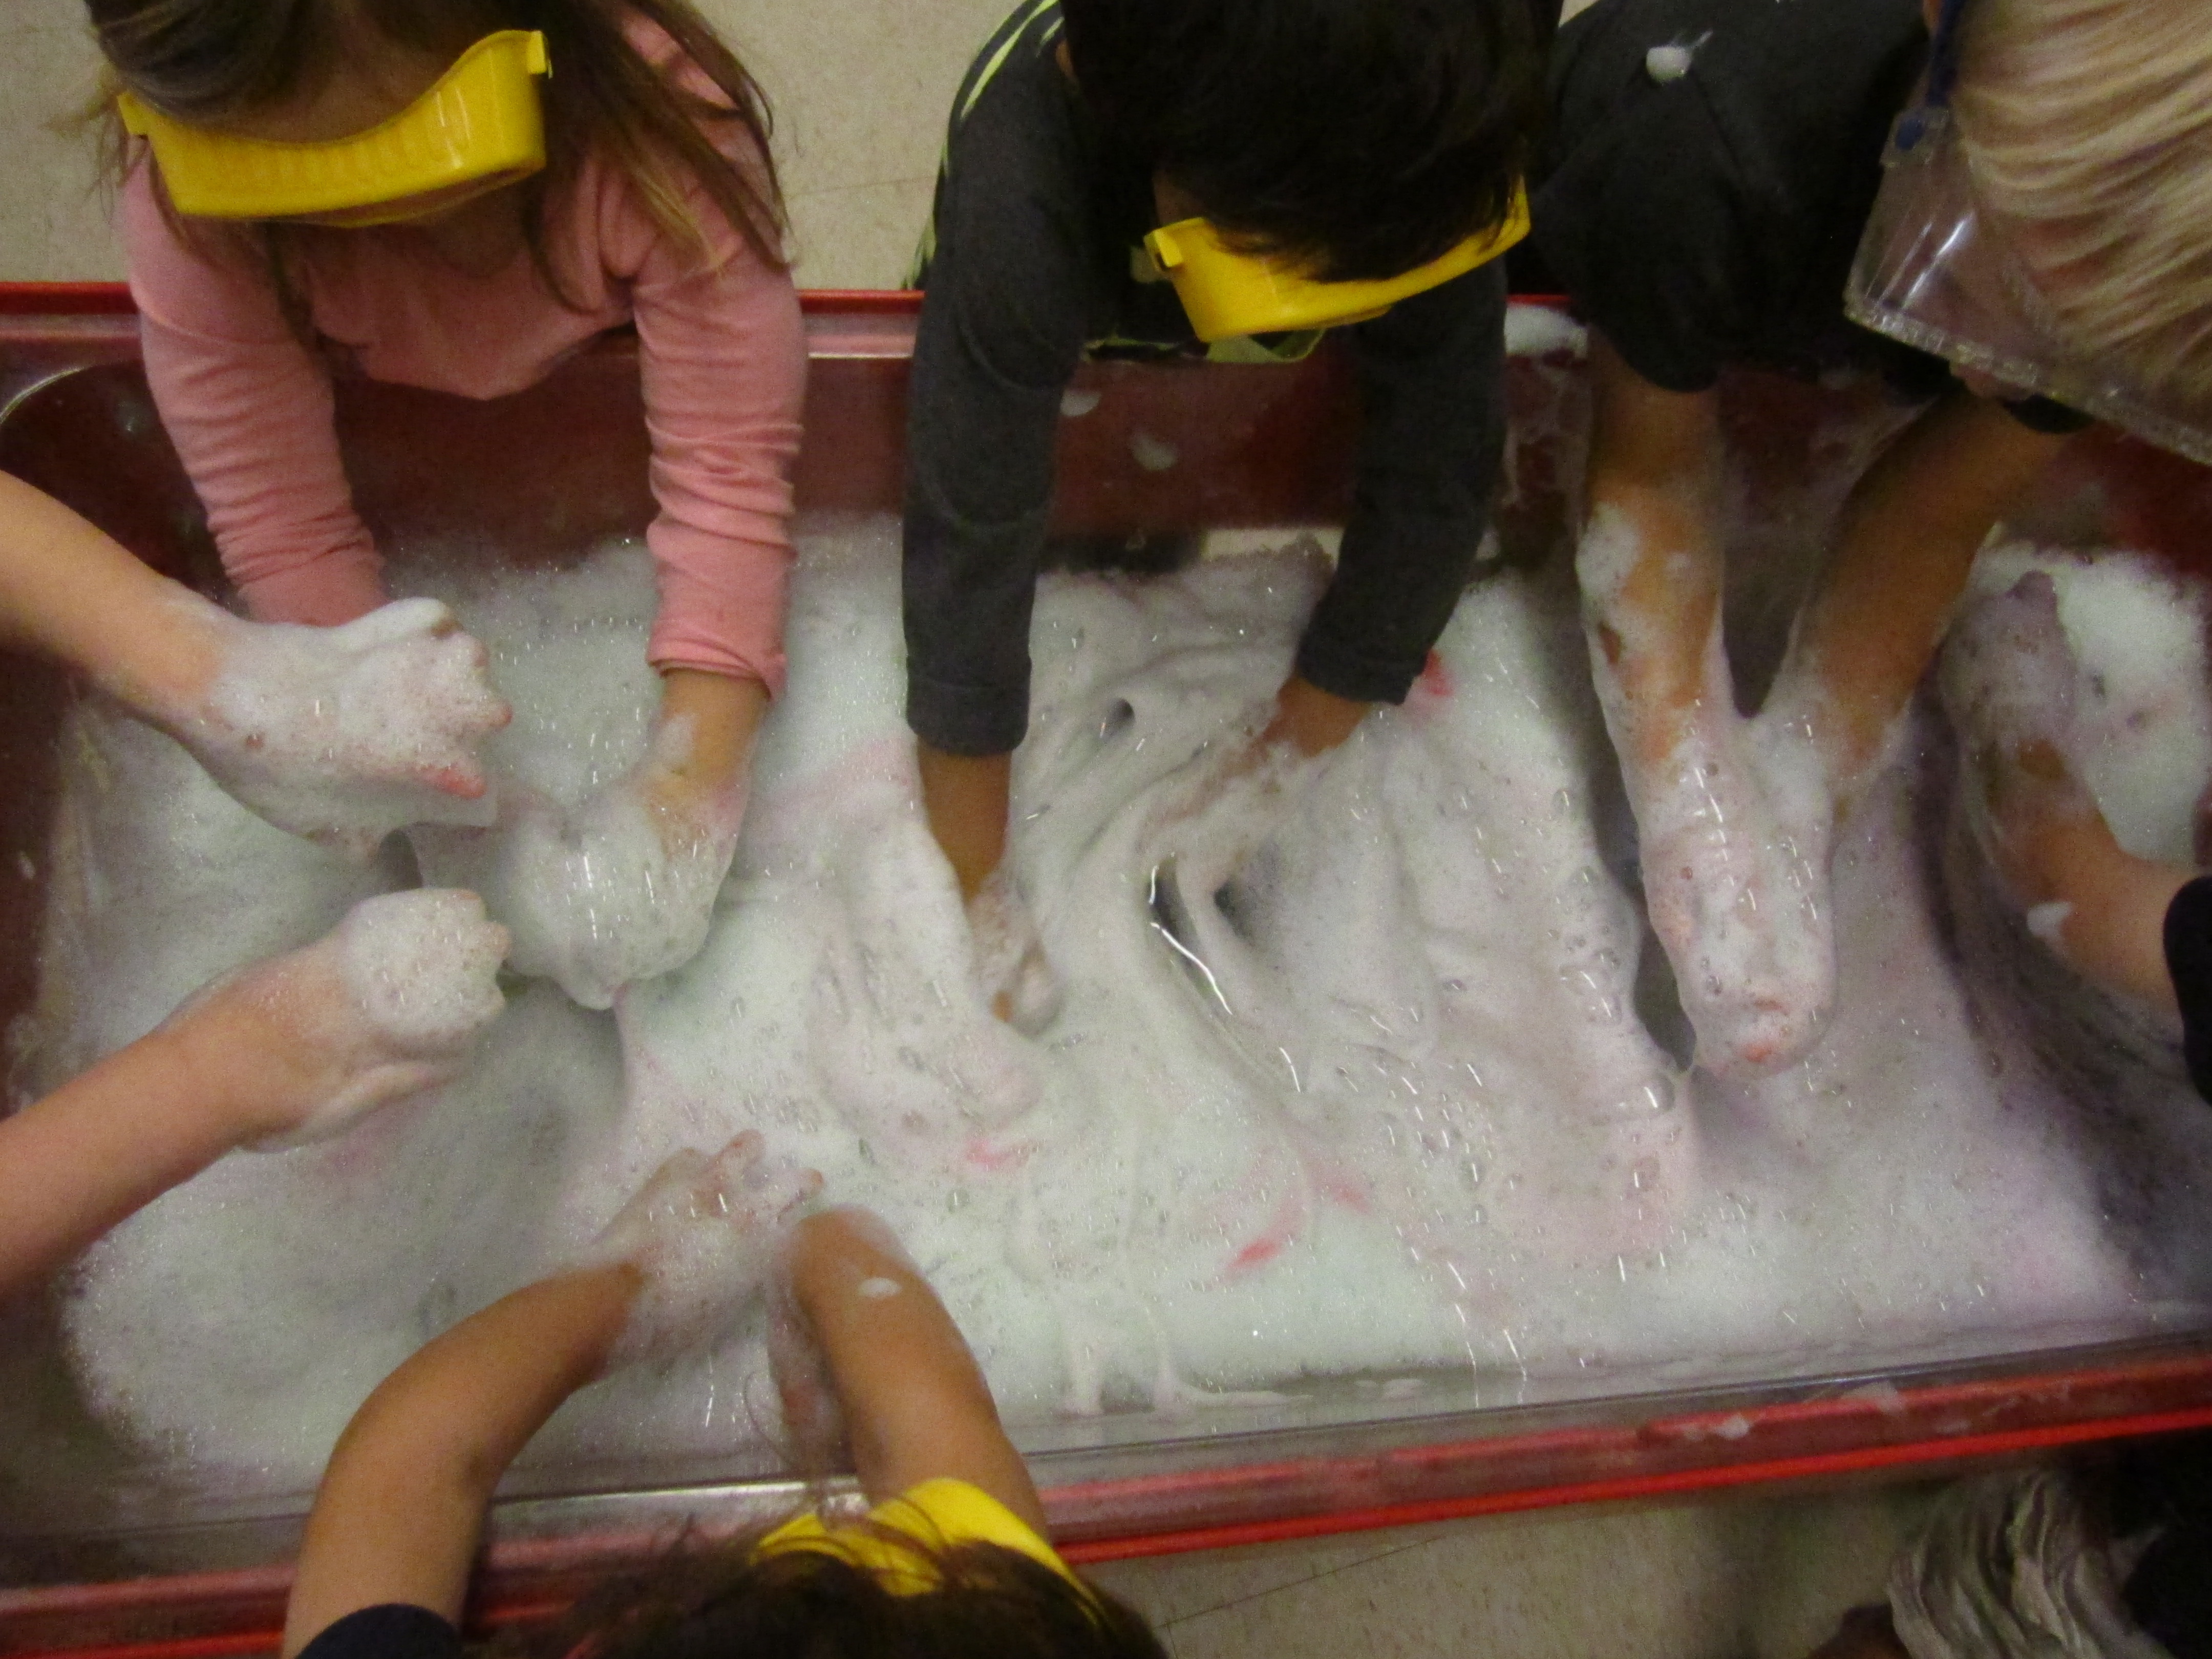 Children playing with foam.